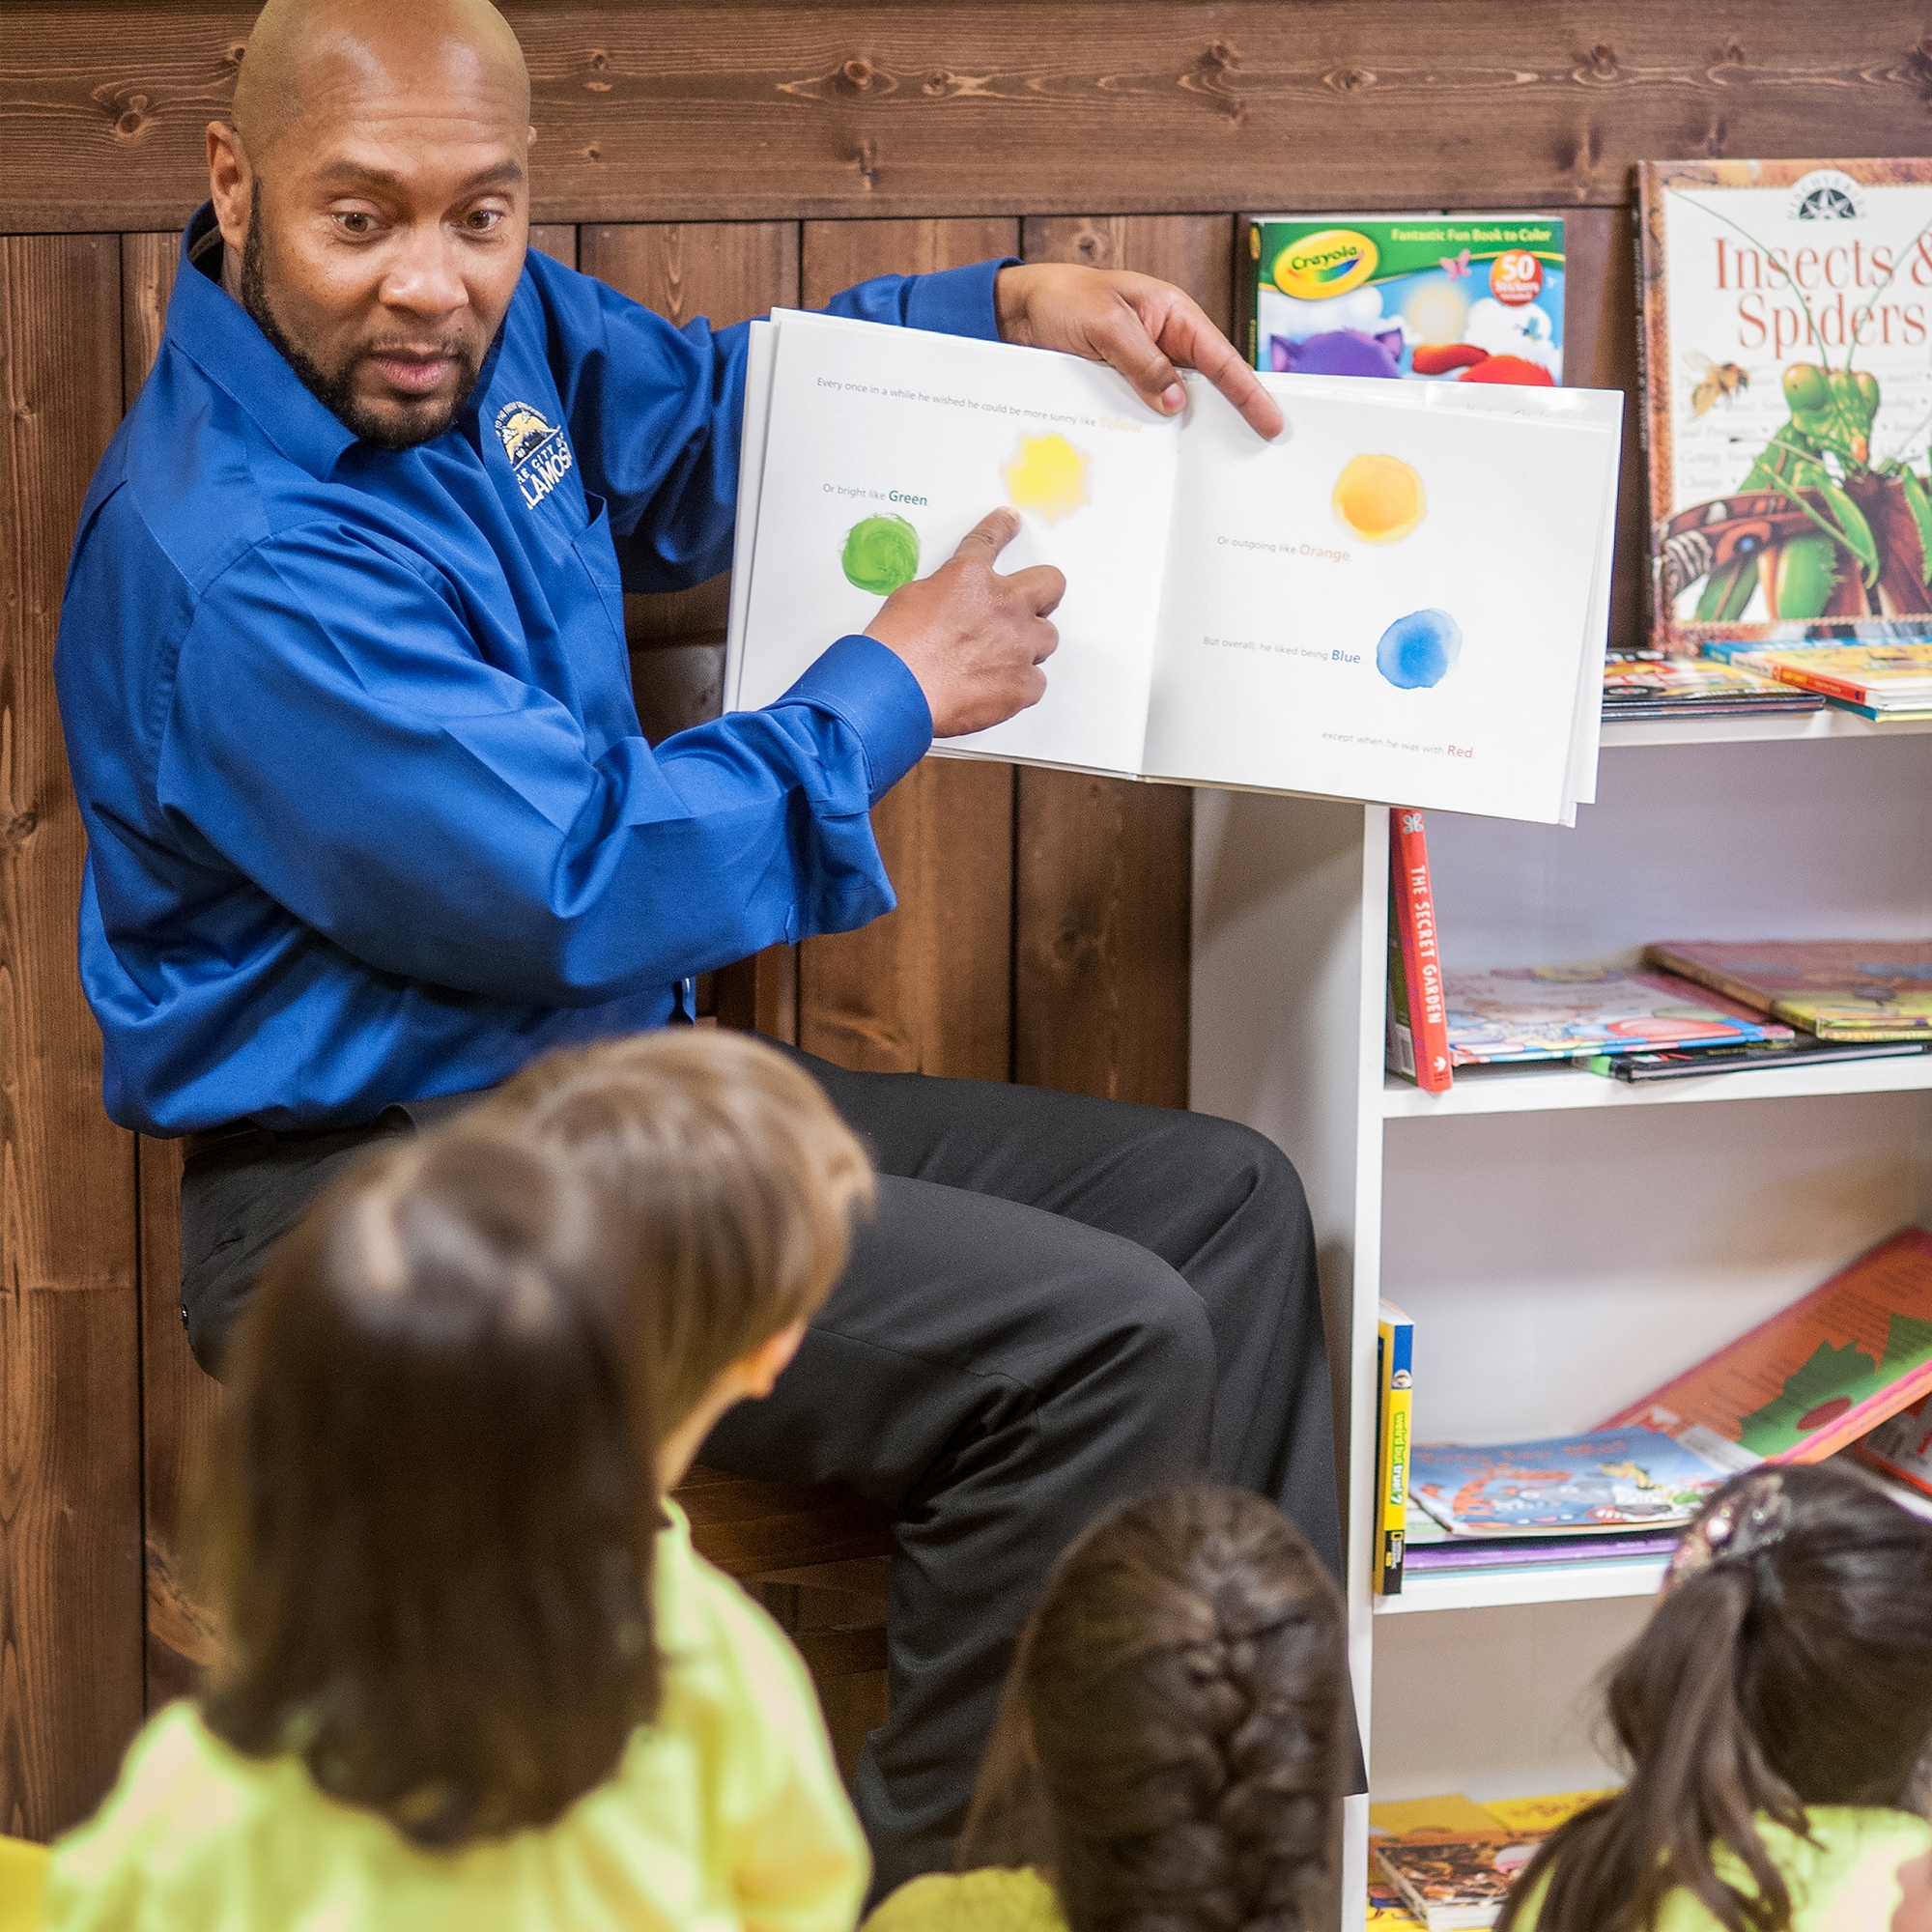 Toll House, a Local business unveils it's reading corner with a read-a- loud with Mayor Pro-Tem Tyron Coleman and students from the local pre-school. The reading corner is a new community initiative with local business, housing communities and doctors offices to foster everyday reading with children. Photo credit: Susan Warner / Save the Children 2016.